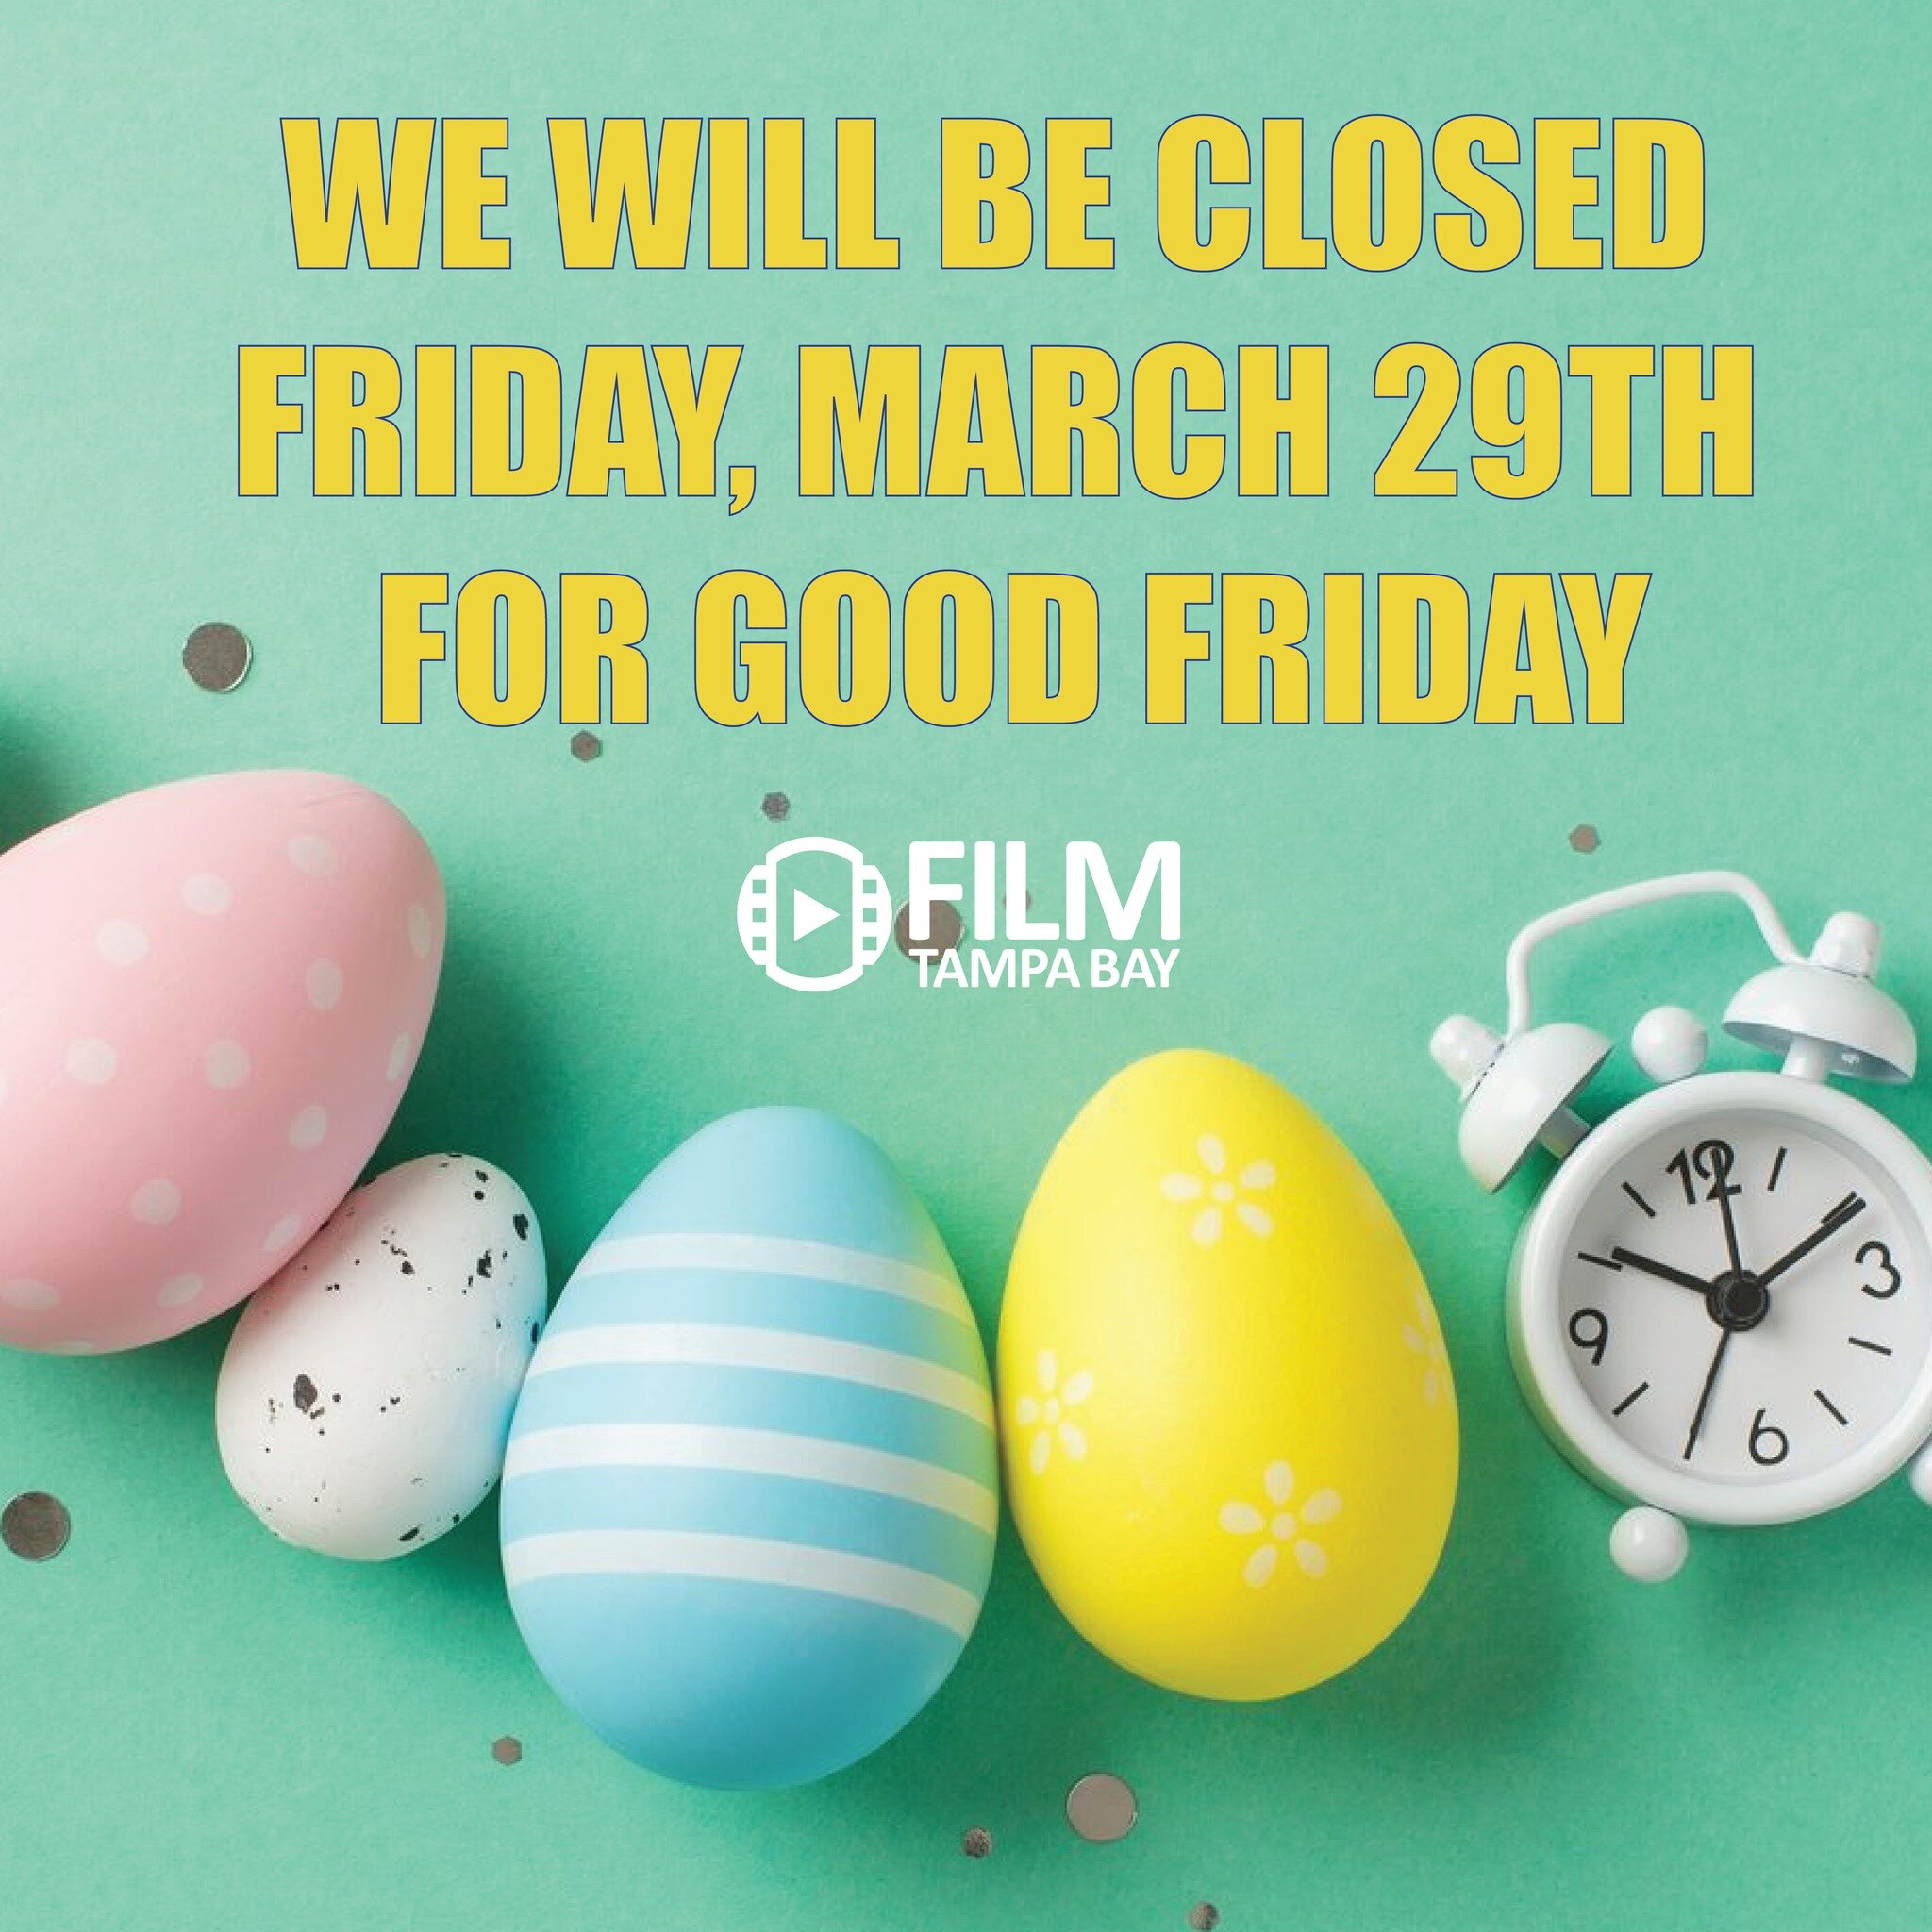 Reminder that our office will be closed this Fri, March 29th in observance of Good Friday. Please ensure all permit applications for the upcoming weekend are received by tomorrow, Wed, March 27th!